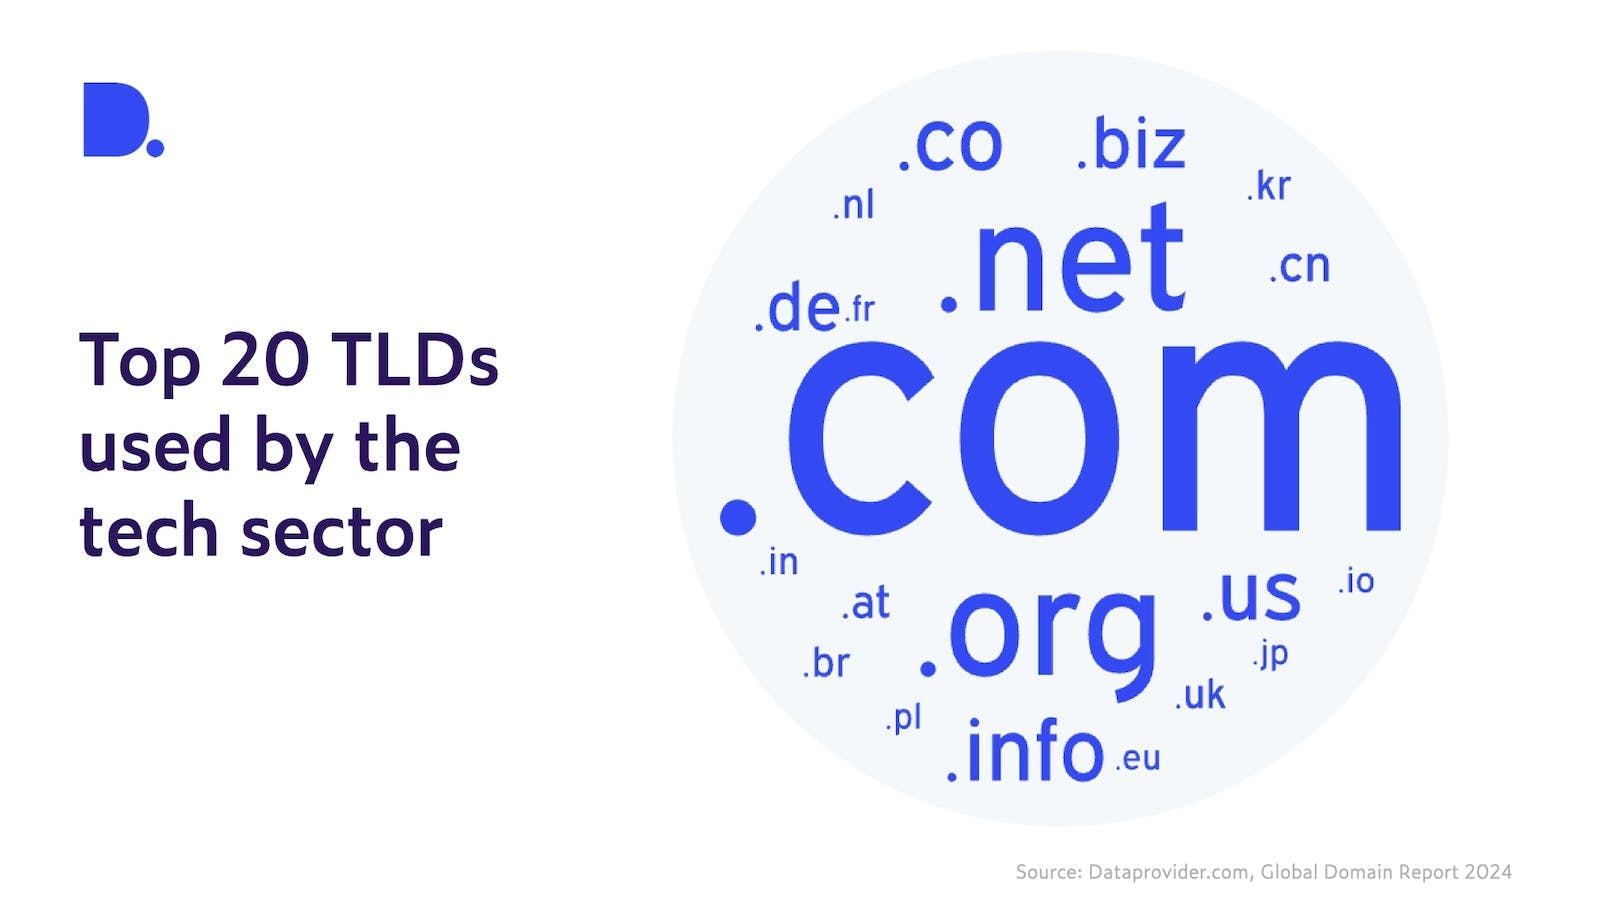 A word cloud of the top 20 TLDs used by tech companies